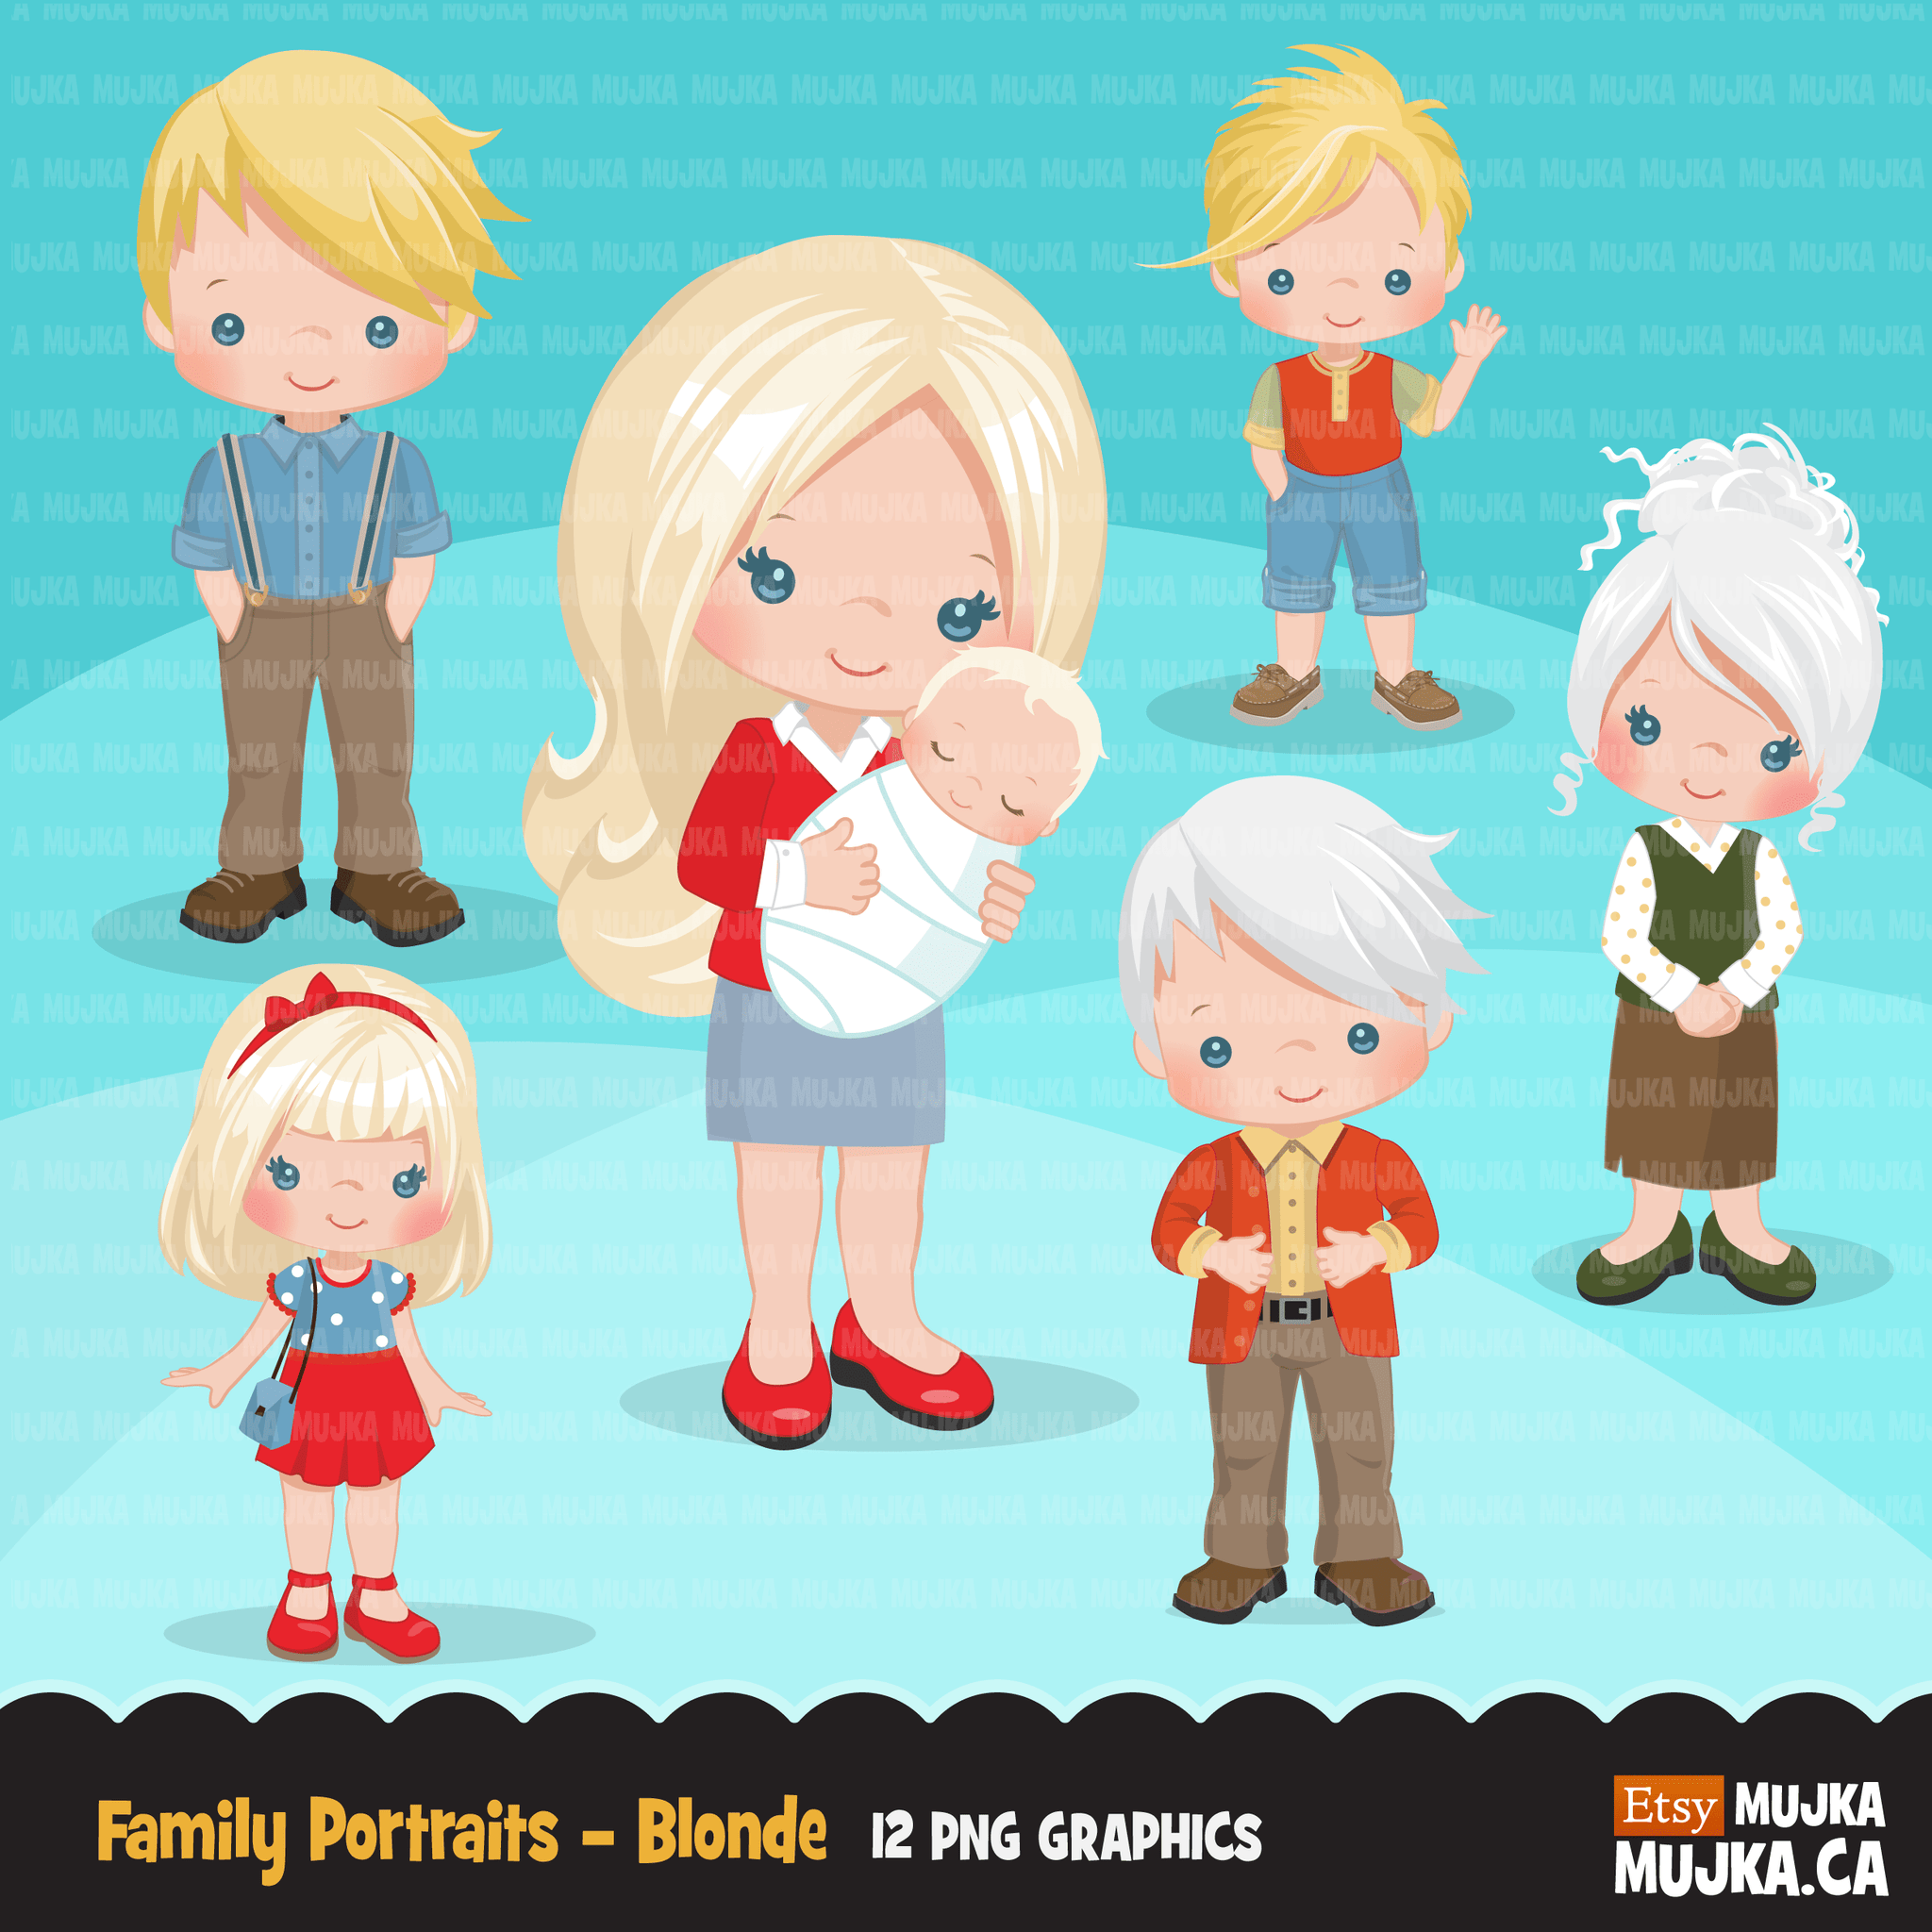 Family clipart Bundle. Collection of mother, father, son, daughter, seniors and accessories graphics. Boy girl